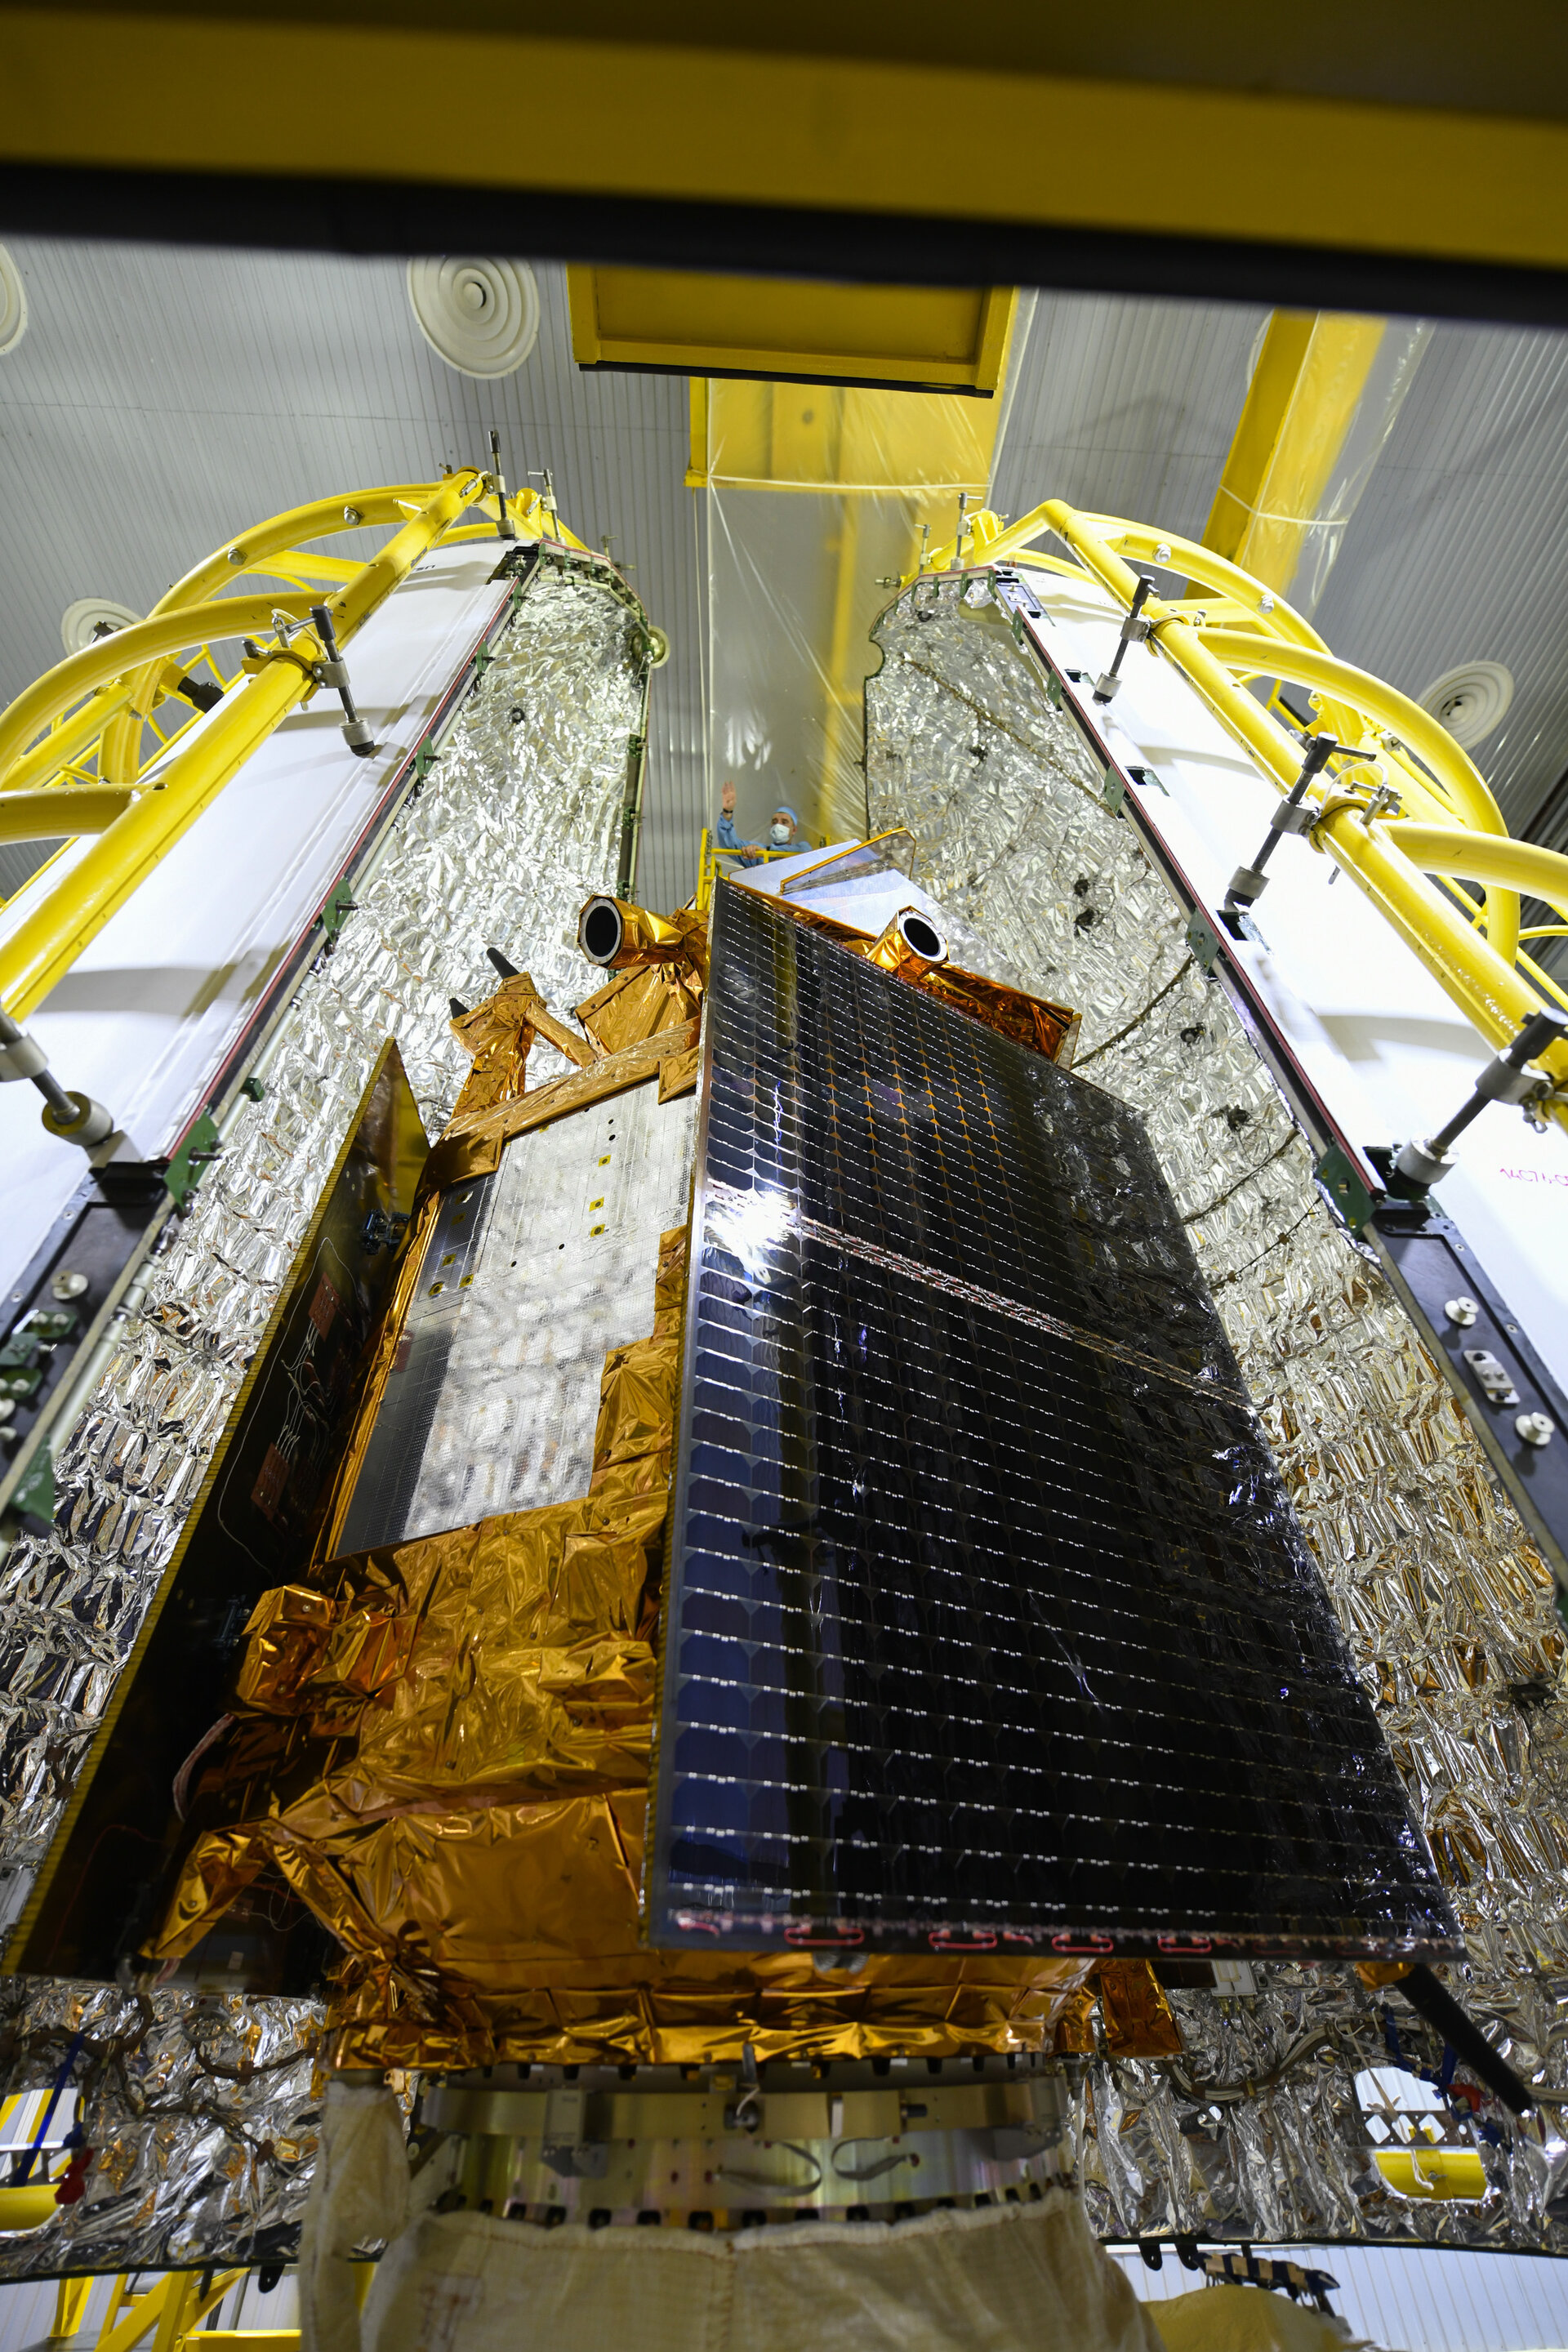 Sentinel-5P seen during the encapsulation within the launcher fairing